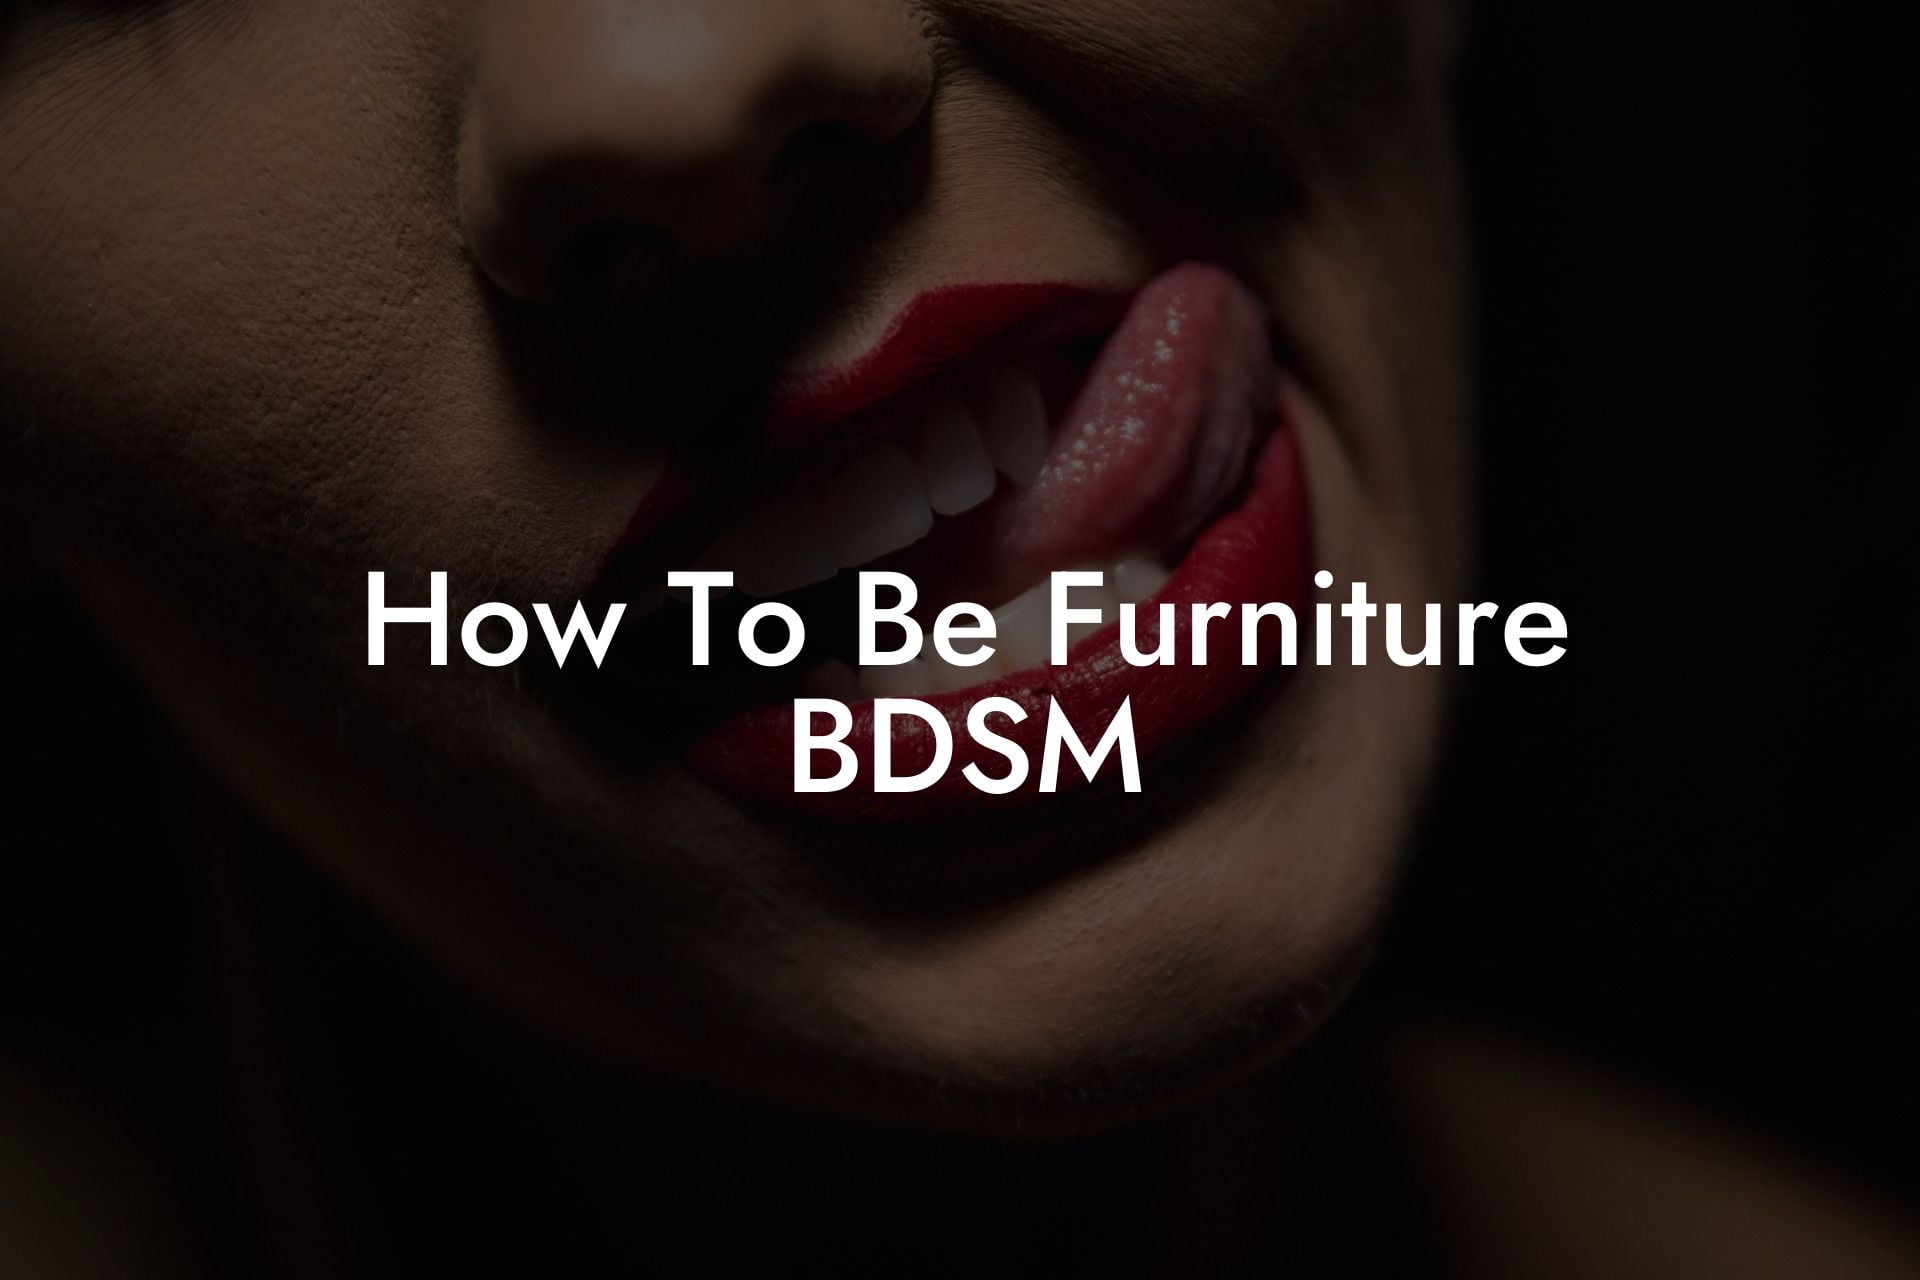 How To Be Furniture BDSM